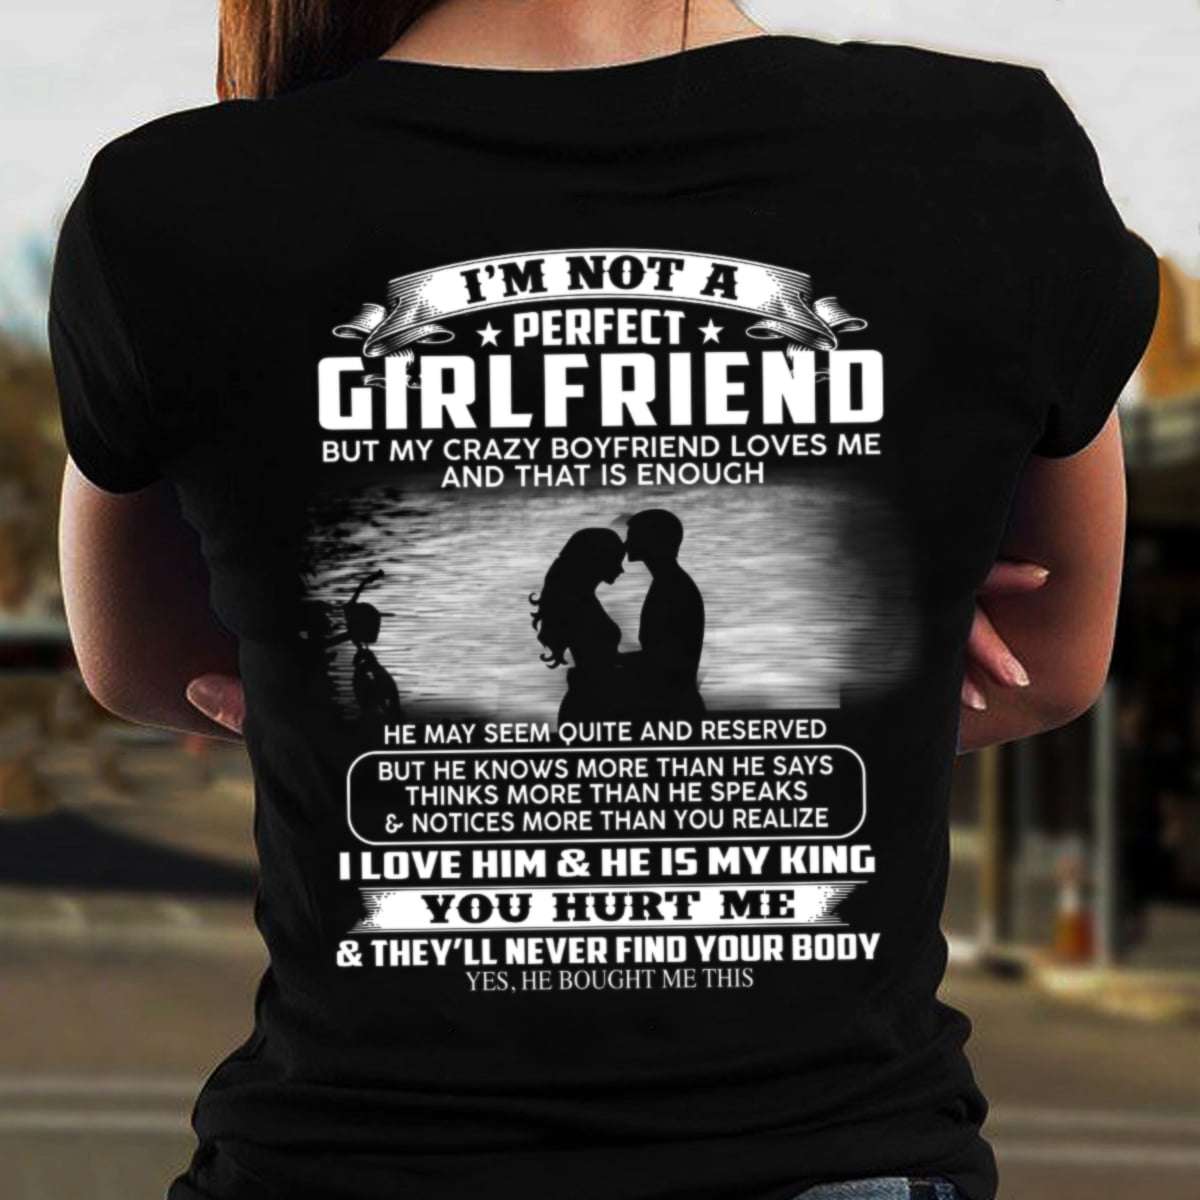 I'm not a perfect girlfriend but my crazy boyfriend loves me ...